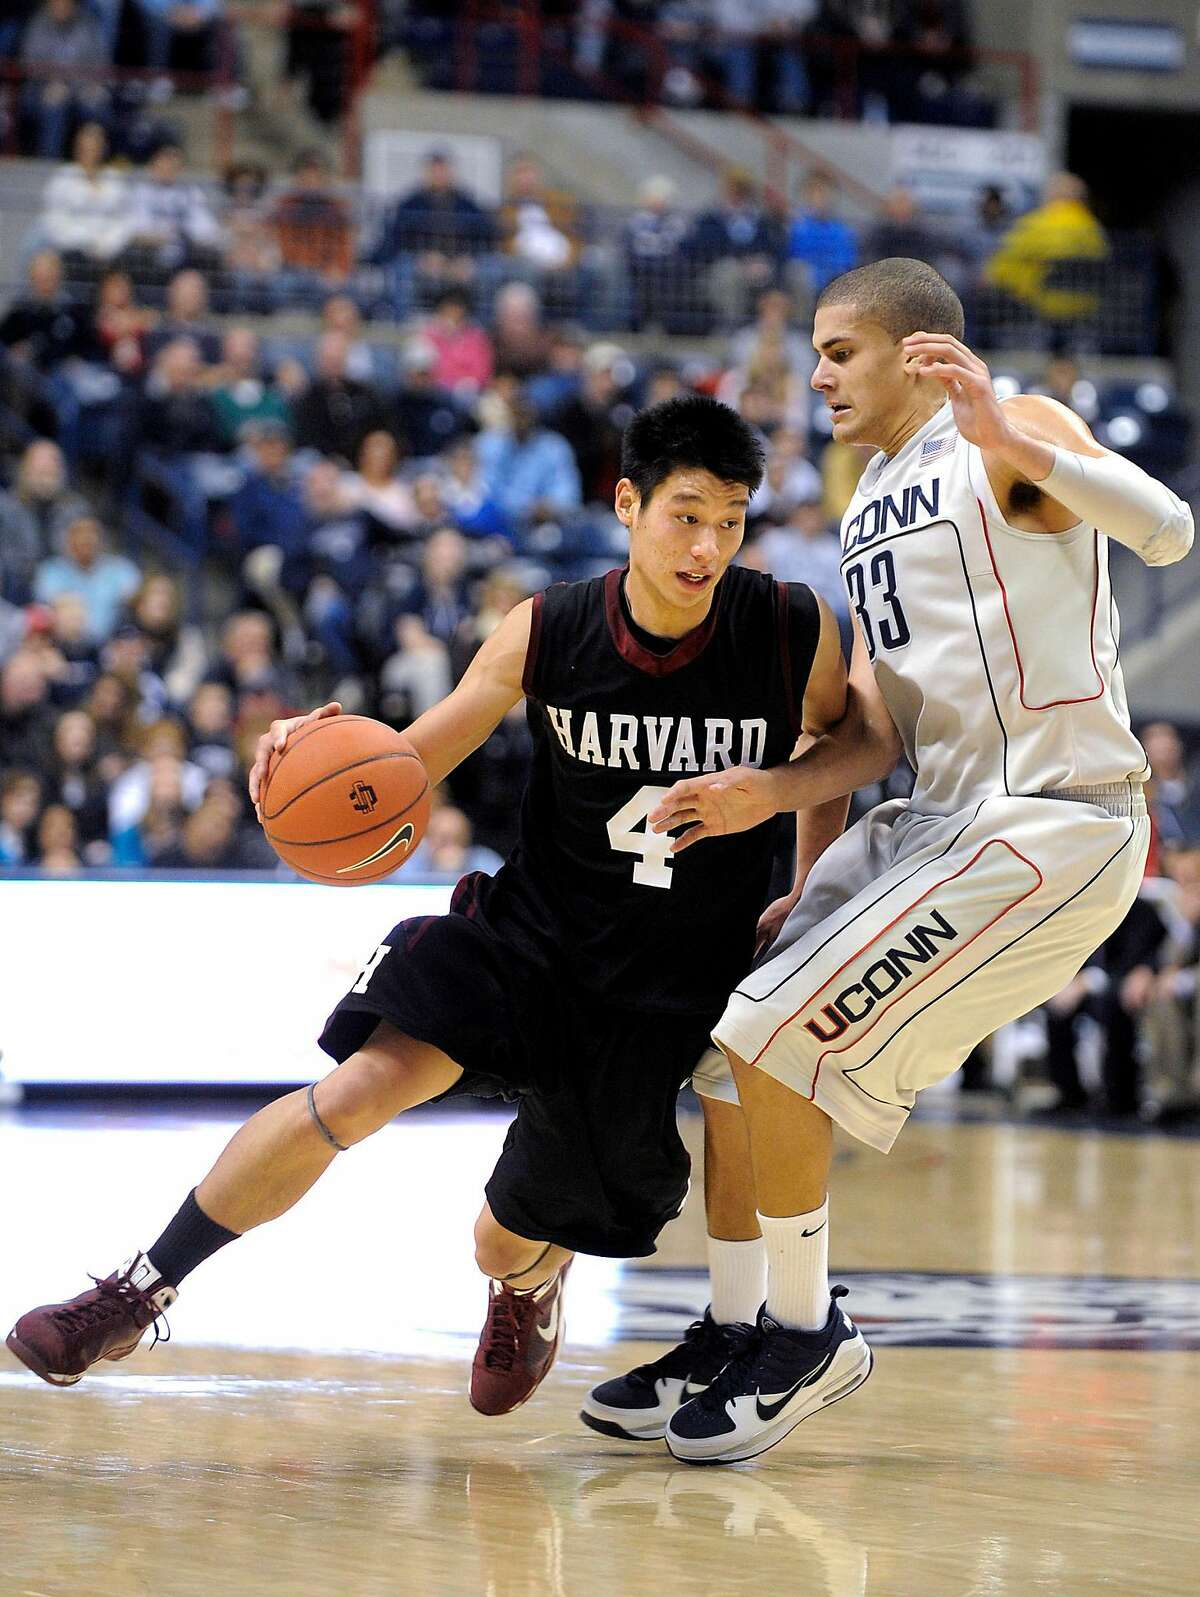 Harvard's Jeremy Lin, left, drives past Connecticut's Gavin Edwards during the second half of Connecticut's 79-73 victory in their NCAA college basketball game in Storrs, Conn., on Sunday, Dec. 6, 2009. Lin scored a game-high 30 points with nine rebounds and Edwards scored 12 points with five rebounds.